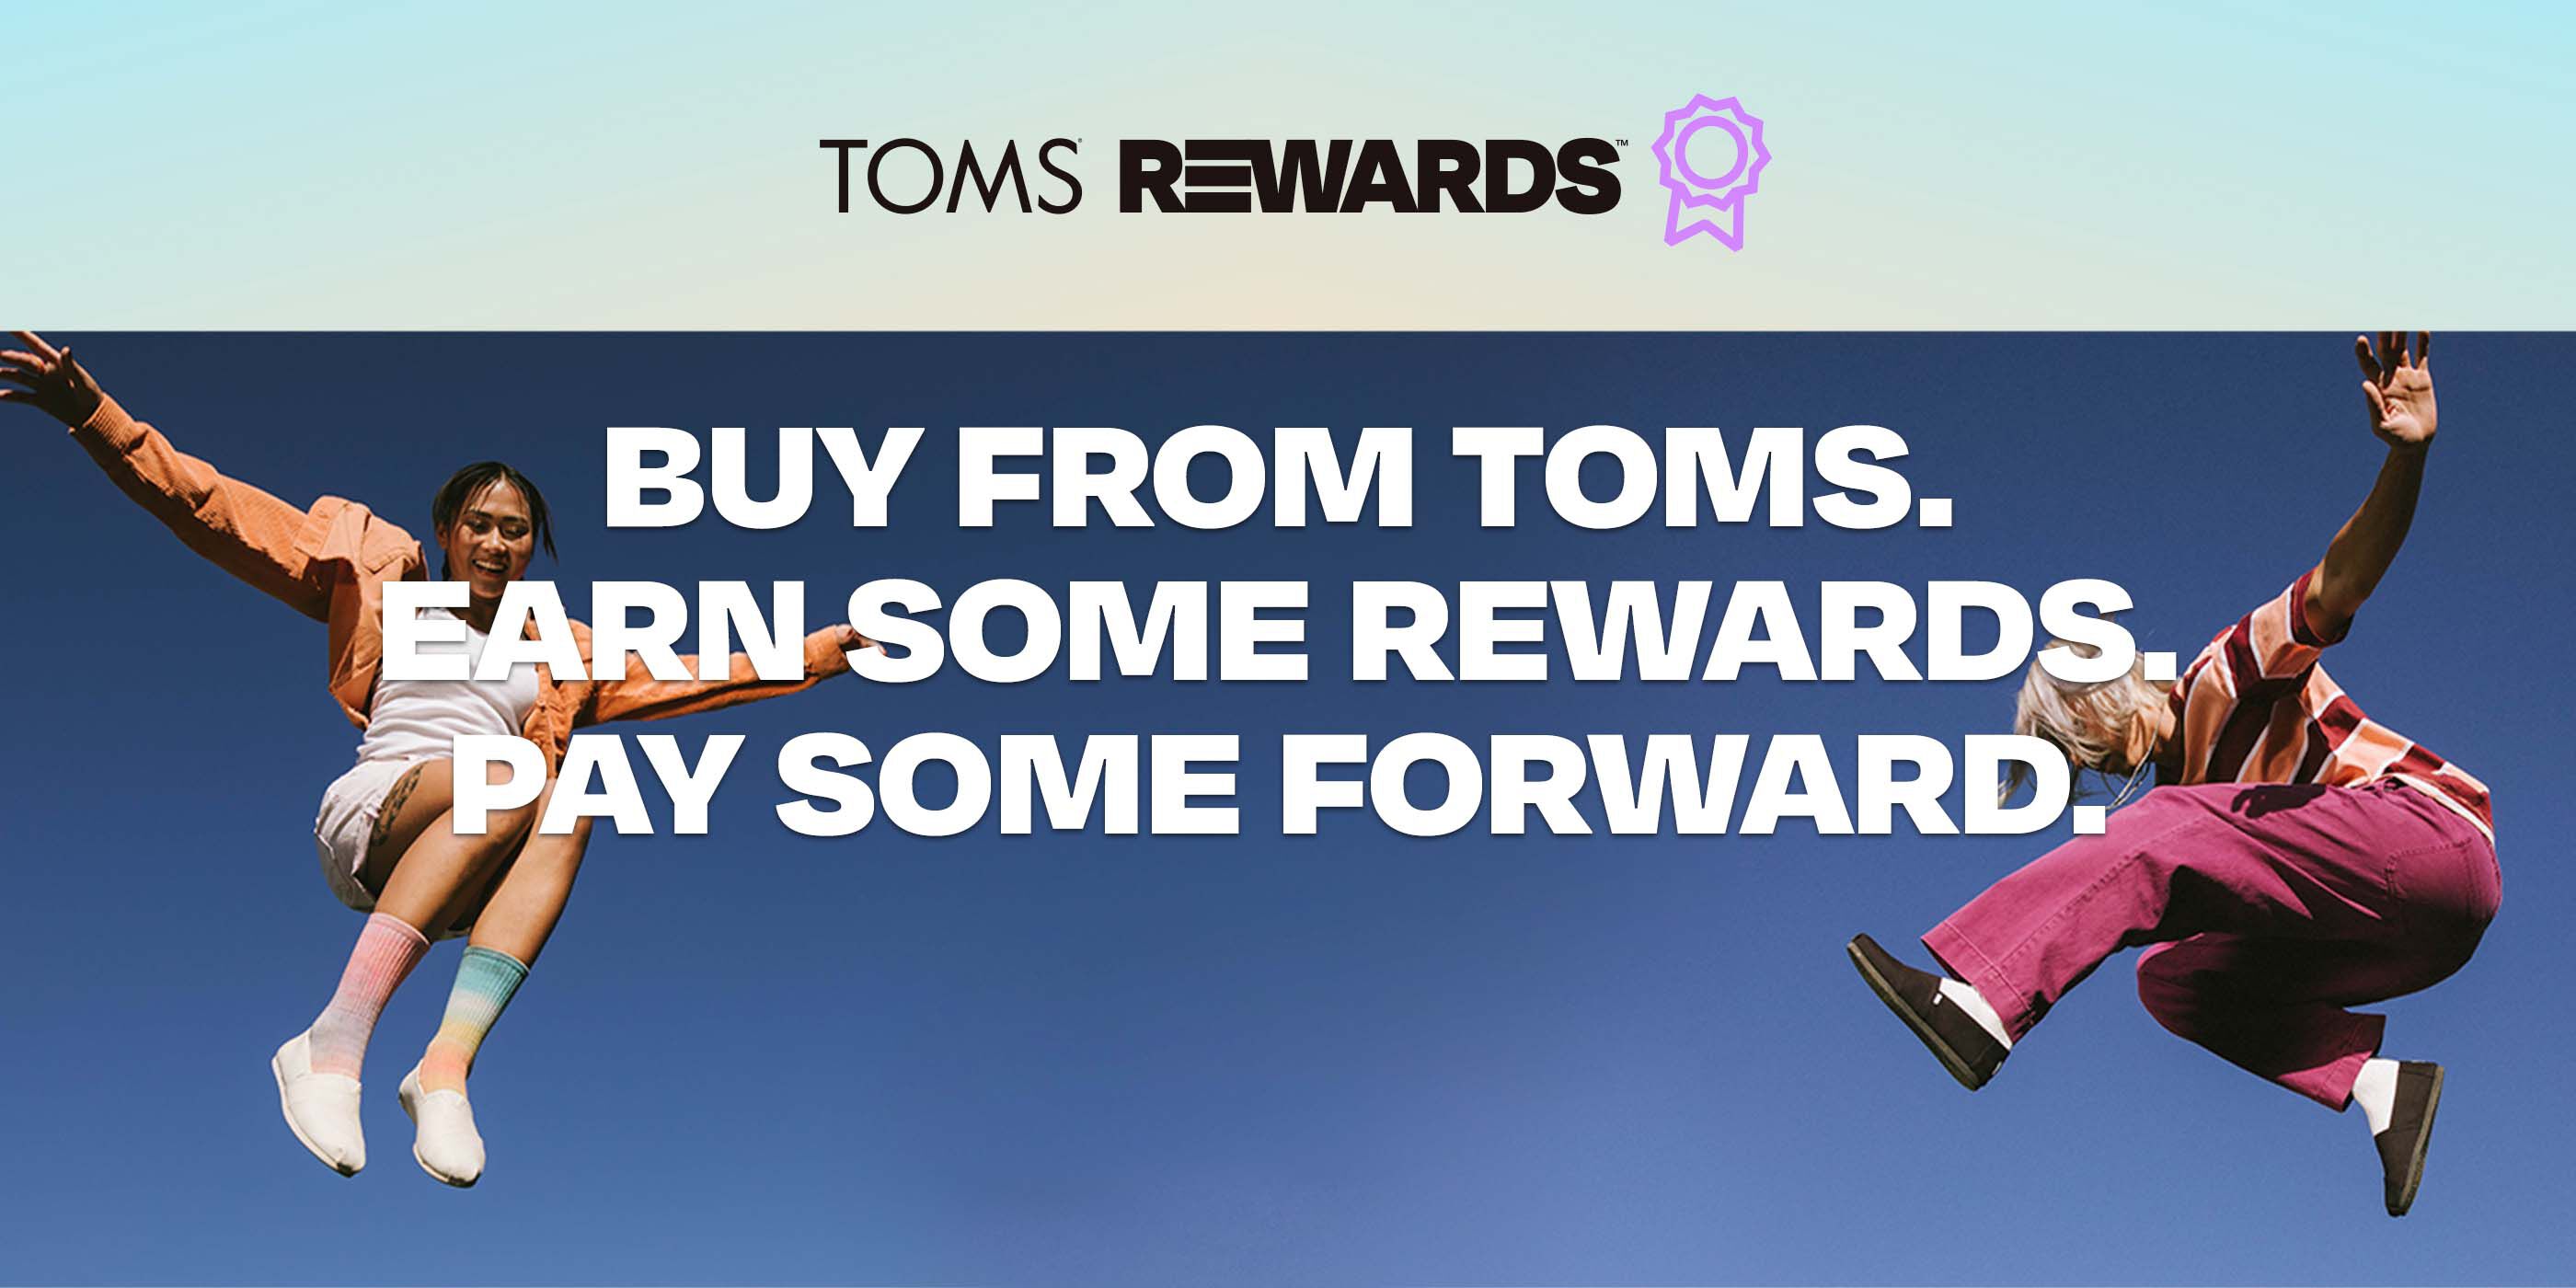 TOMS Rewards. Buy from TOMS. Earn some rewards. Pay some forward.